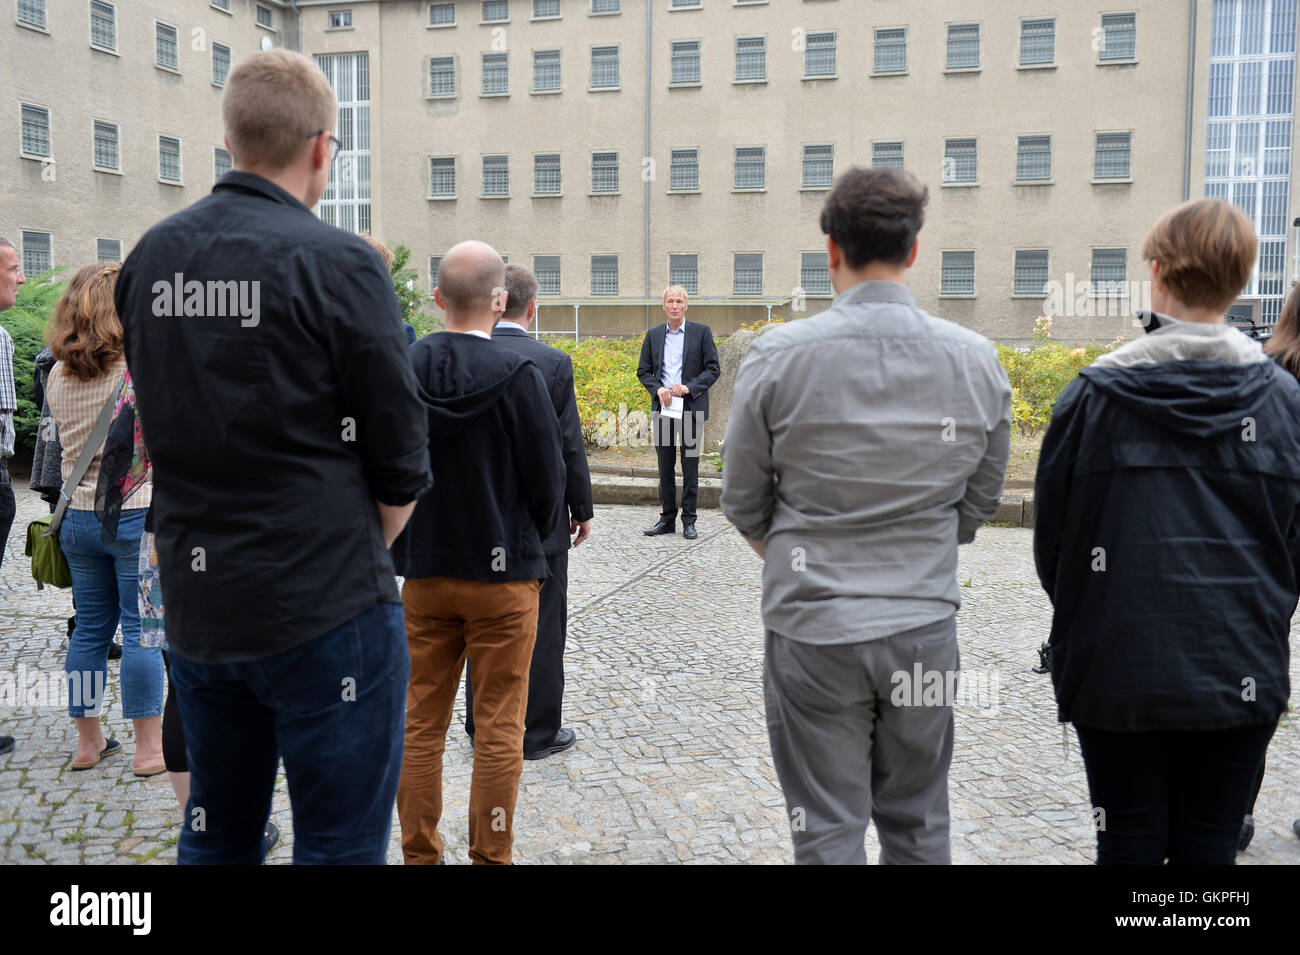 Berlin, Germany. 23rd Aug, 2016. Hubertus Knabe, director of the Stasi prison memorial site Berlin-Hohenschoenhausen, commemorates the victims of Stalinism and Nazism with a wreath laying in Berlin, Germany, 23 August 2016. 23 August is the 77th anniversary of the Molotov-Ribbentrop Pact. Photo: Maurizio Gambarini/dpa/Alamy Live News Stock Photo